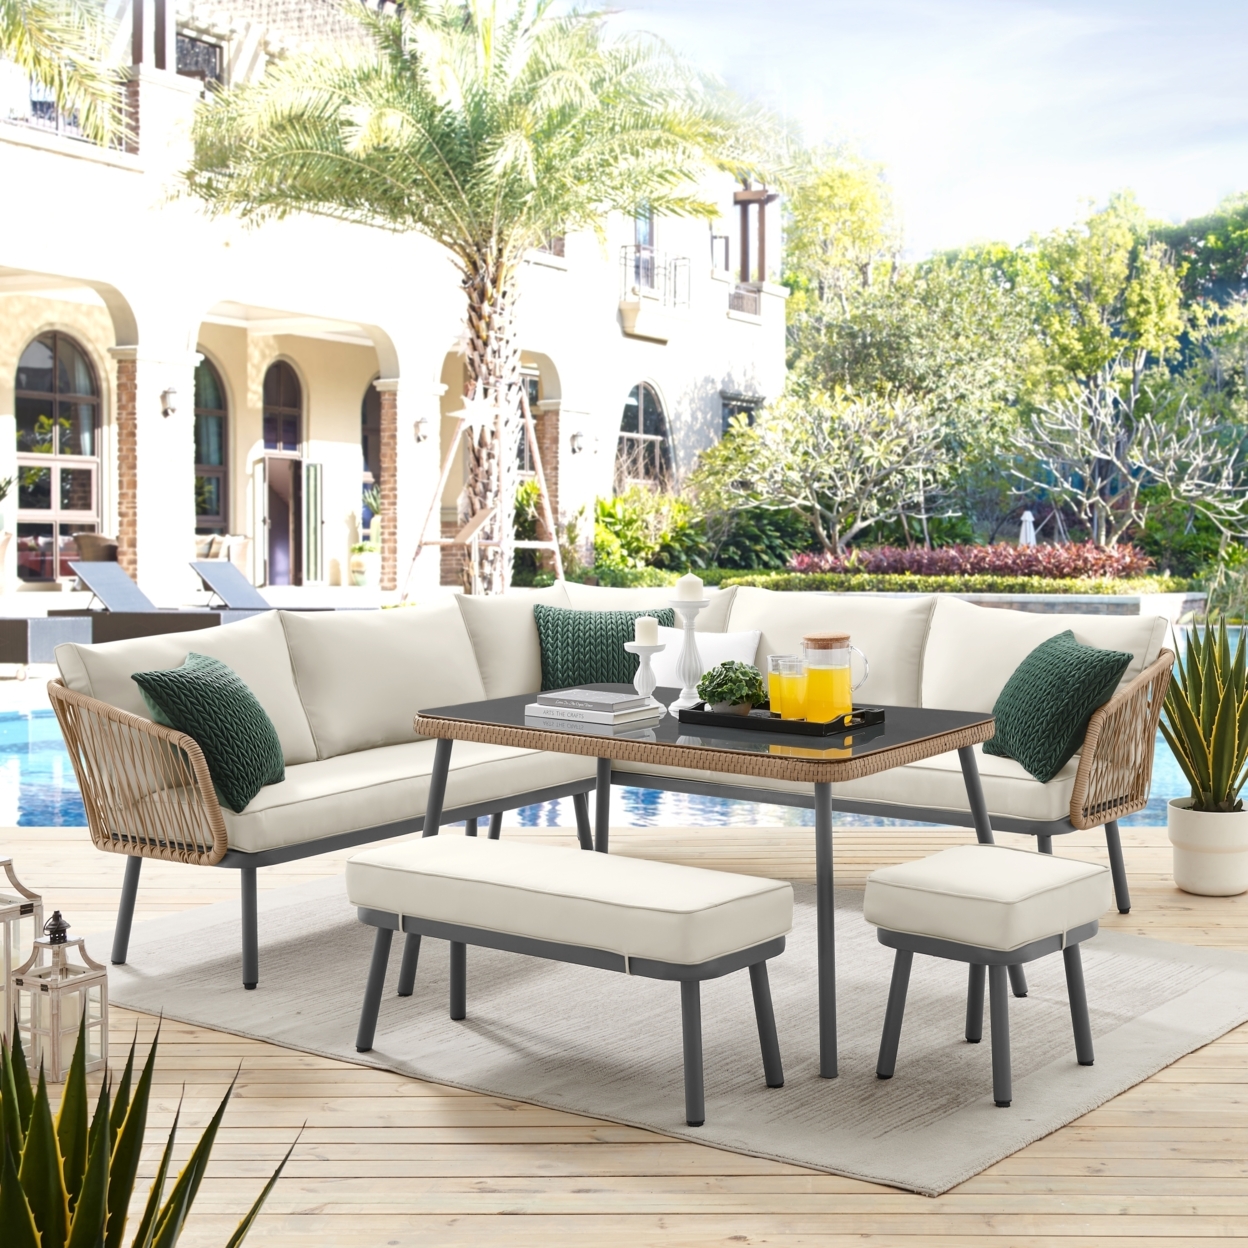 Jaycen Outdoor - Set Includes: 2 Sofas, 1 Bench, 1 Stool/Ottoman, 1 Table - Sand